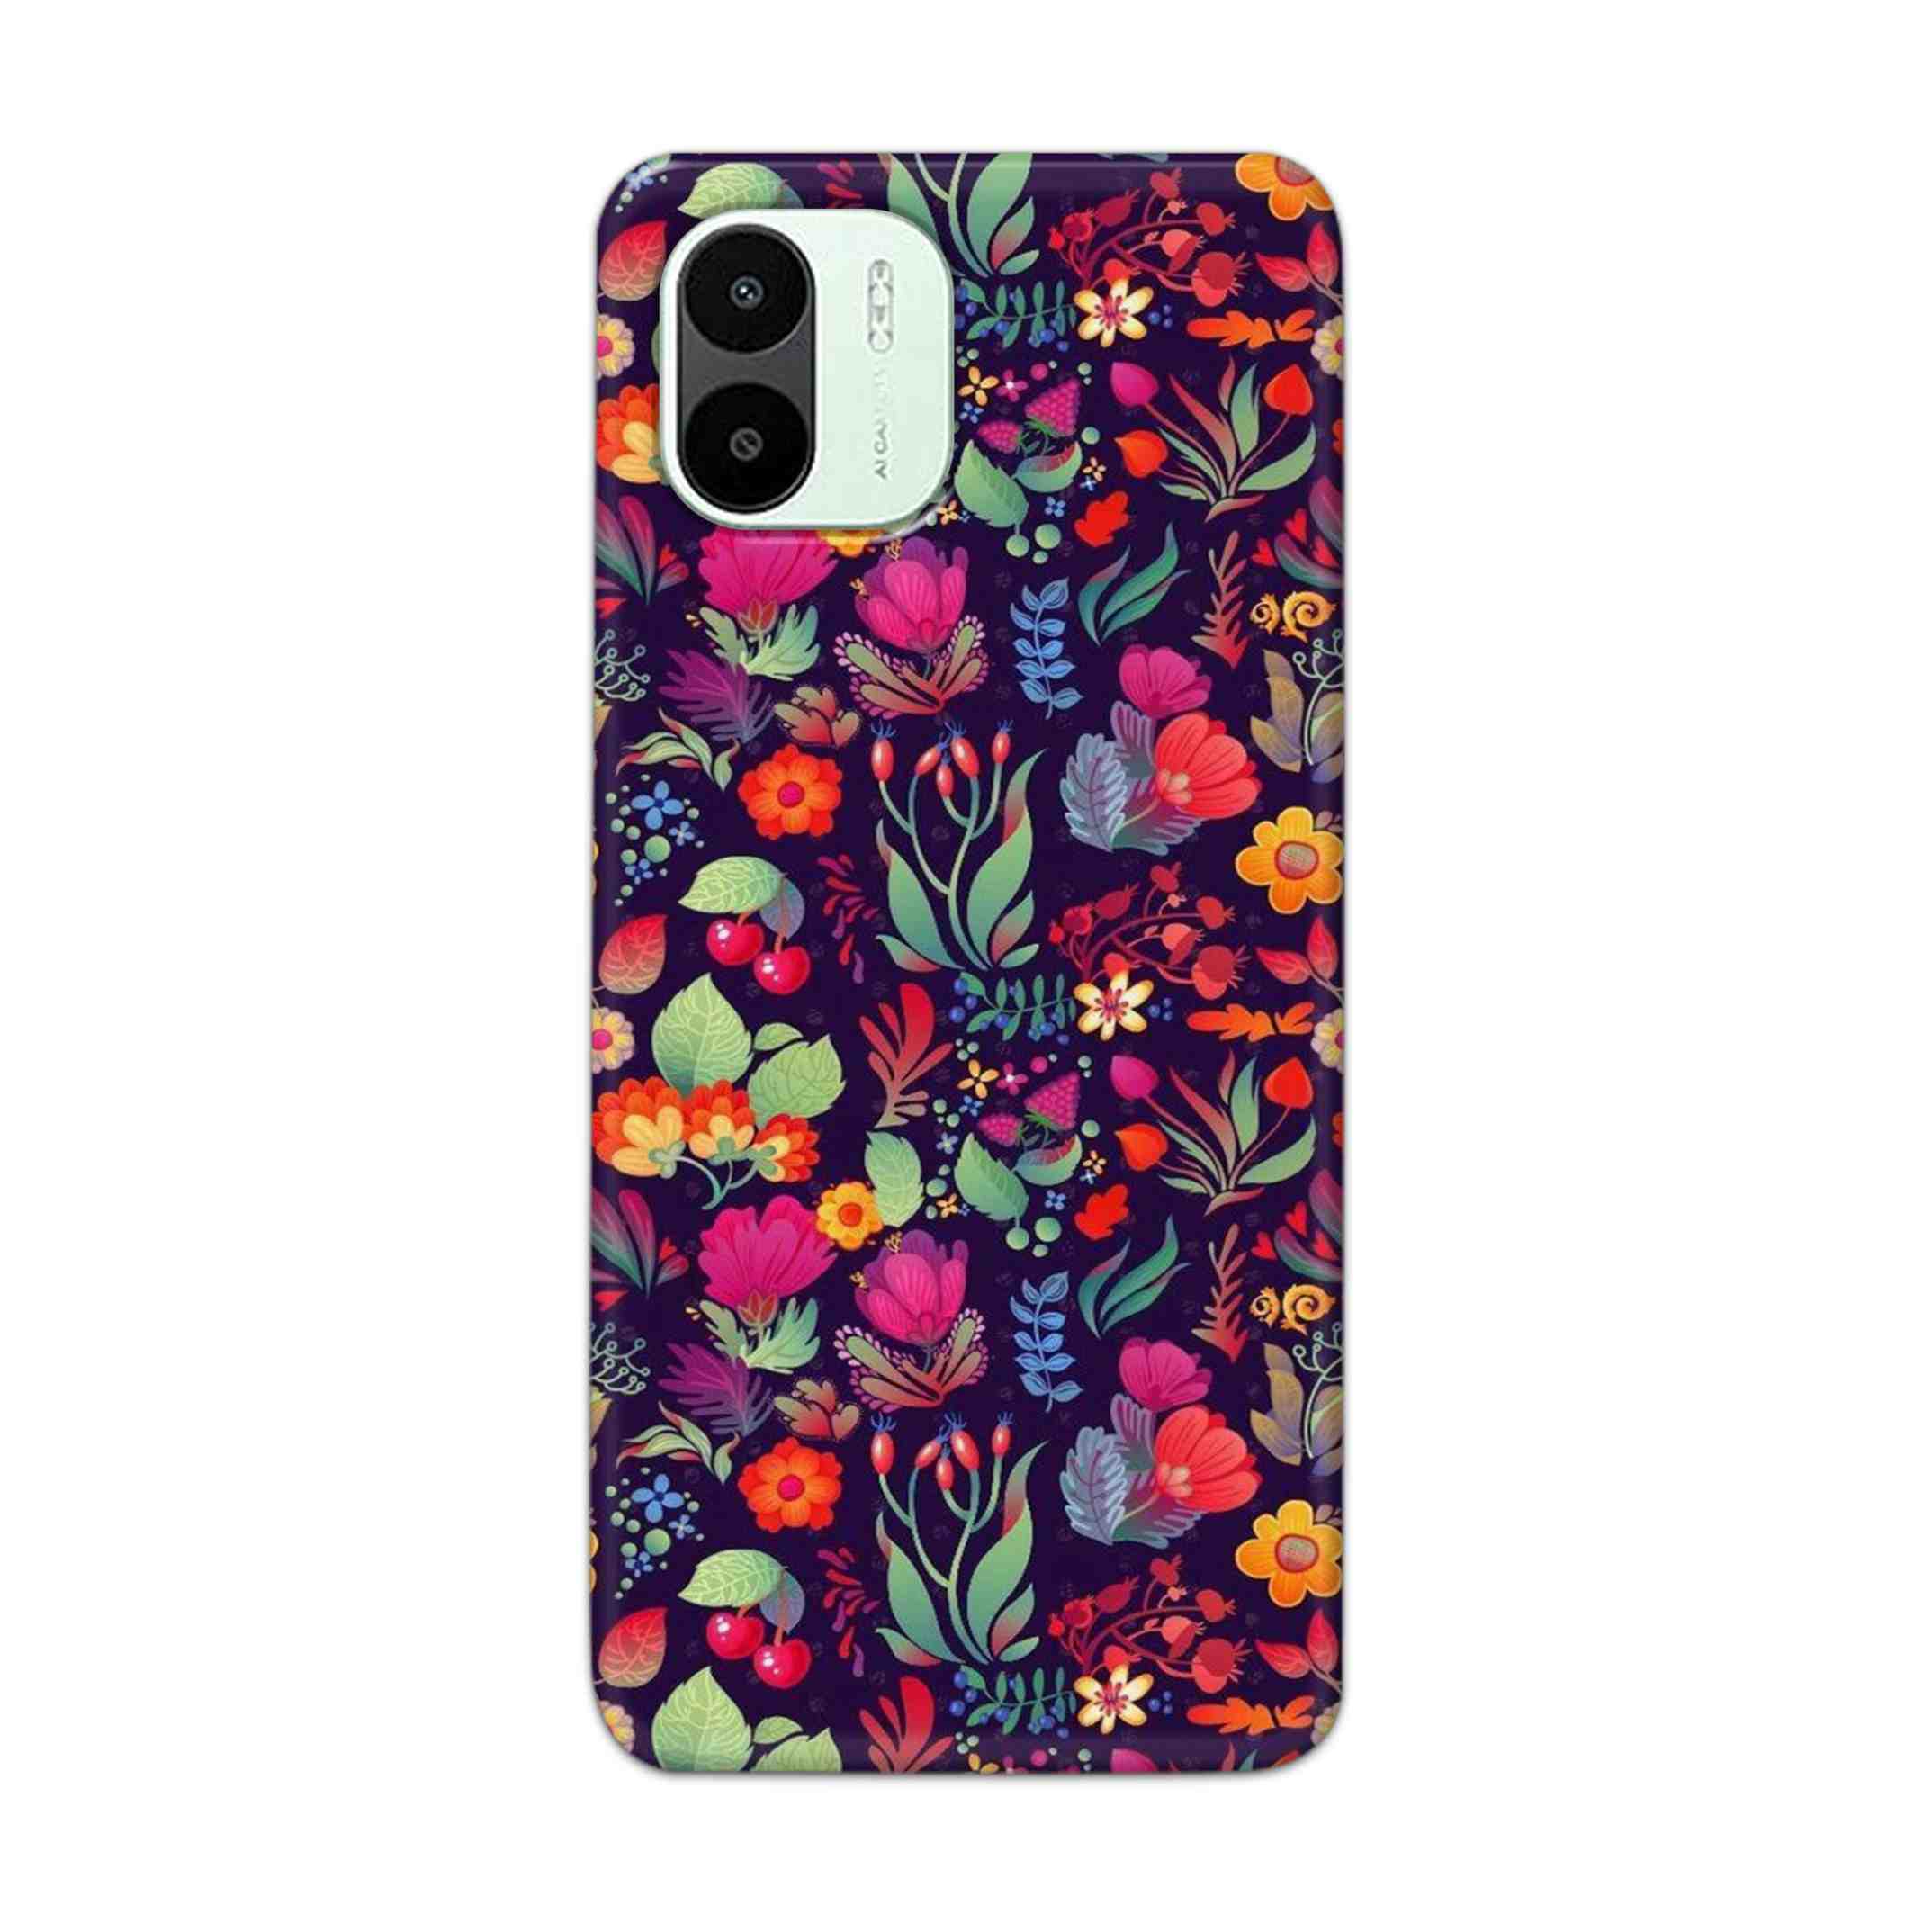 Buy Fruits Flower Hard Back Mobile Phone Case Cover For Xiaomi Redmi A1 5G Online